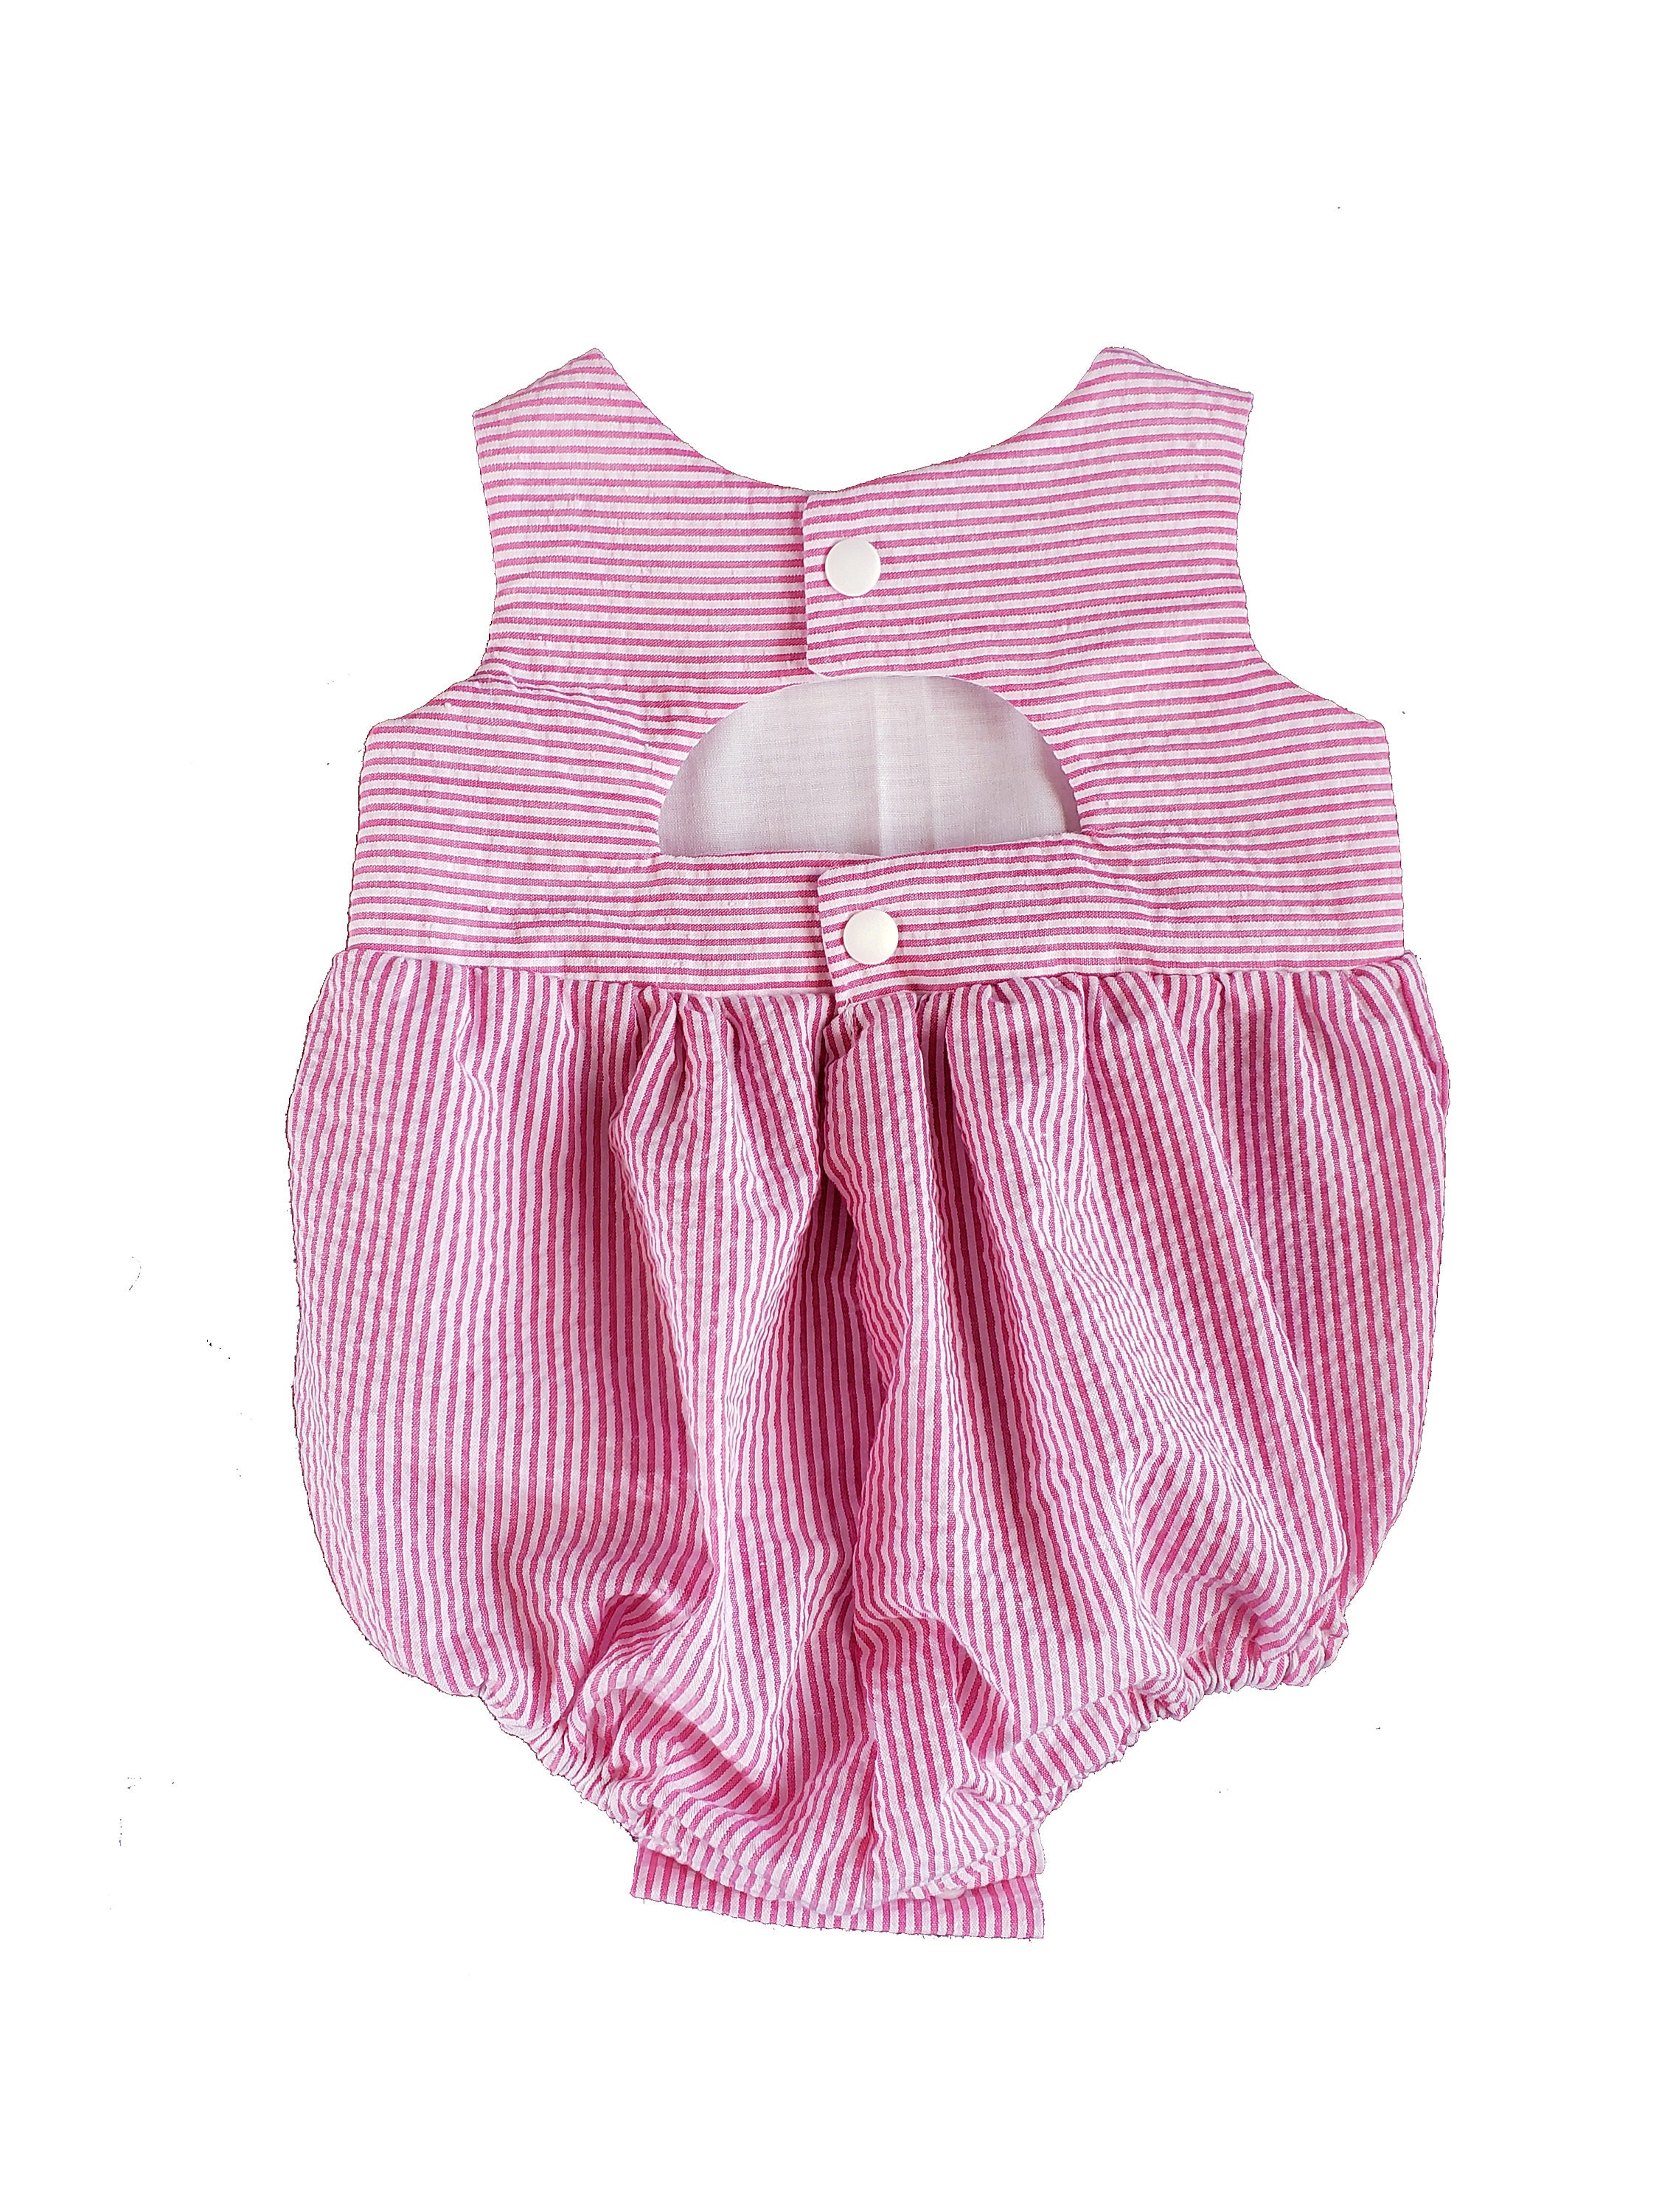 Baby Girl Seersucker Romper Pink and White Monogrammed Bubble - Etsy